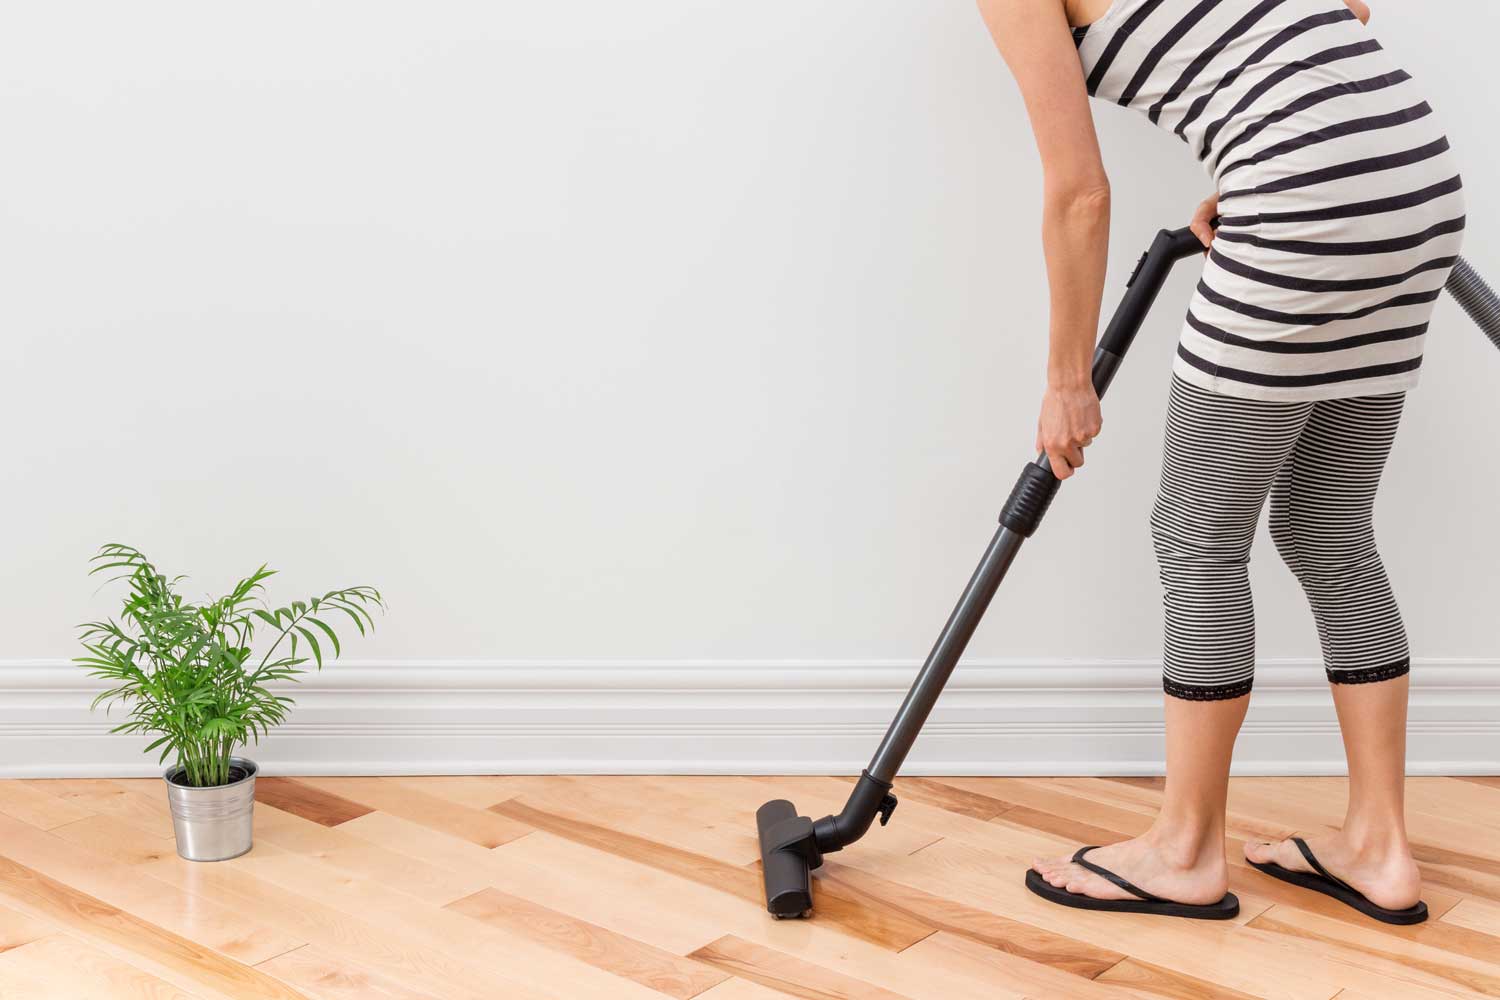 Regulary vacuum or sweep floors to remove dirt and keep your home floors looking amazing - tips from Footprints Floors in Decatur.